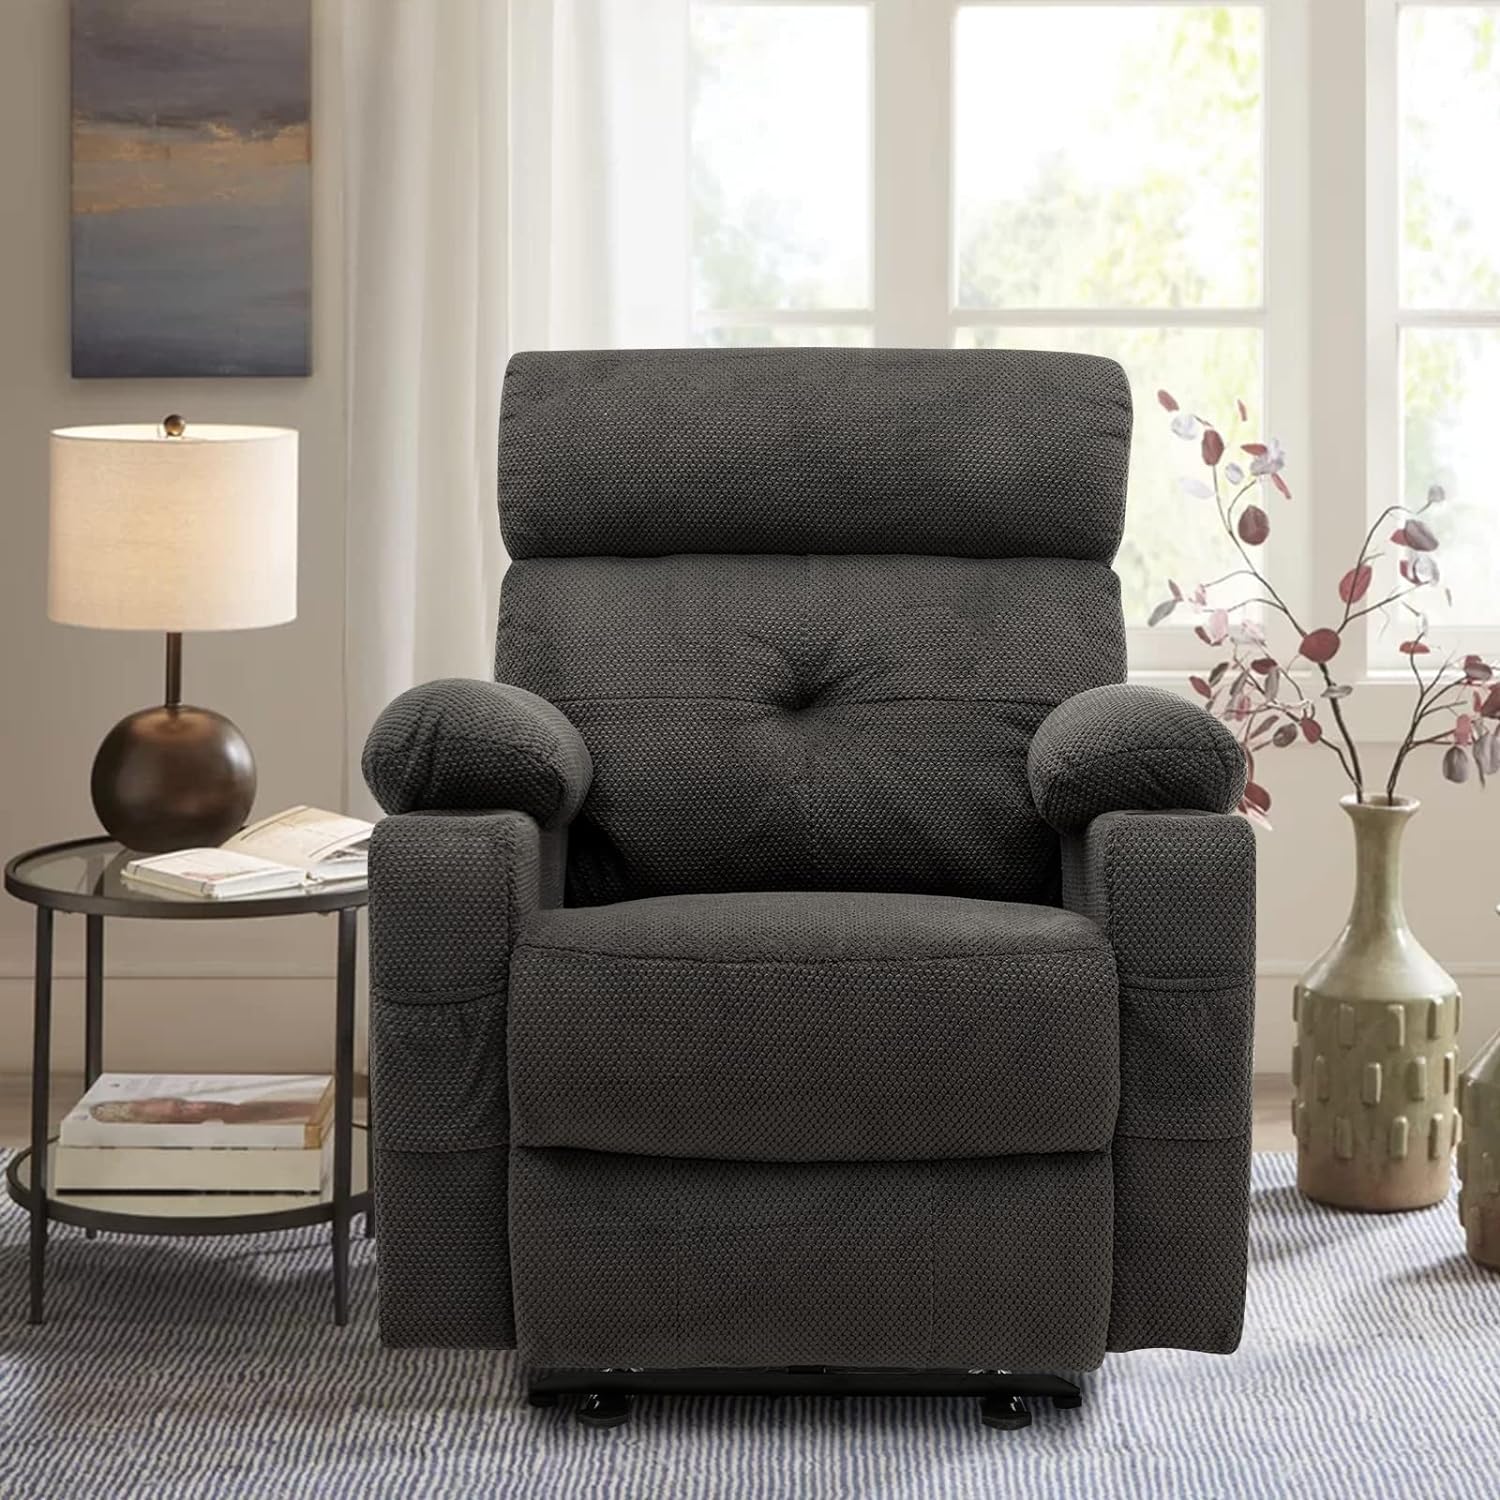 Extended Foot Power Recliner – Now Available